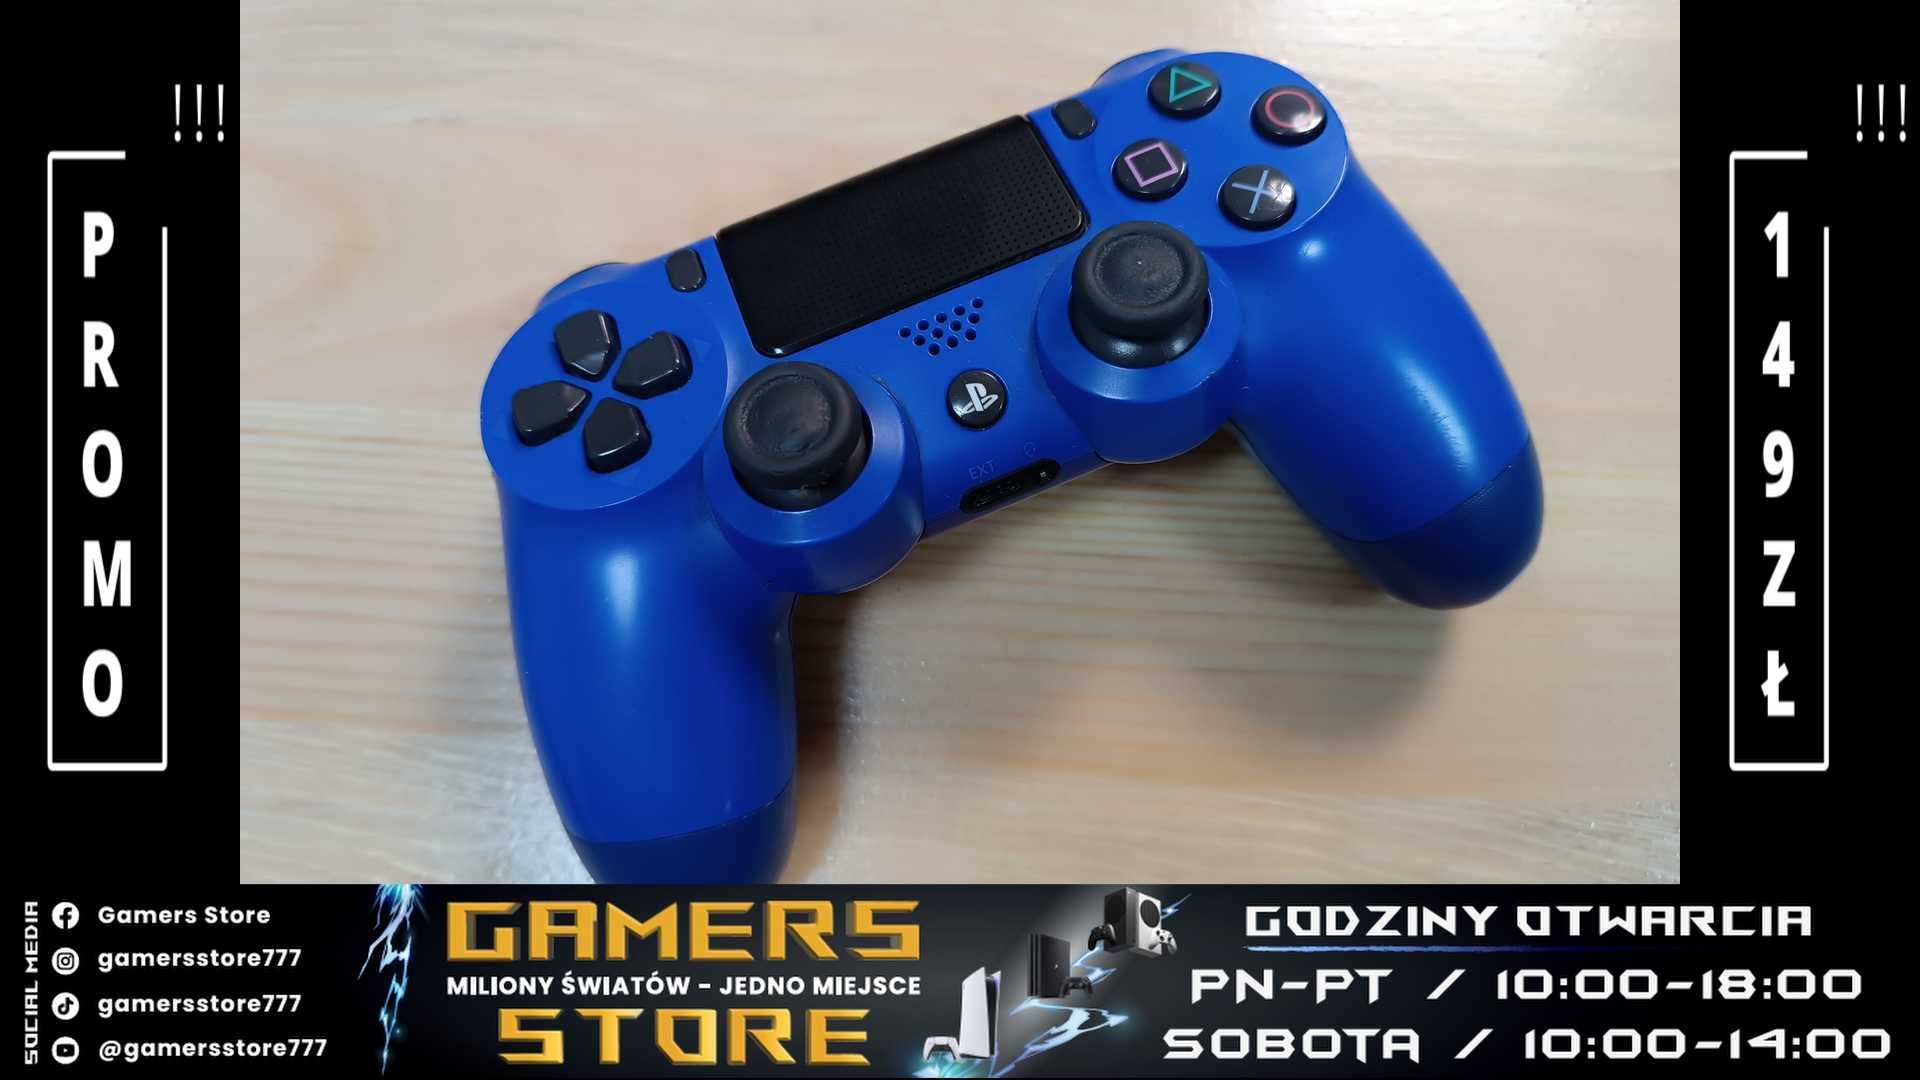 PADY XBOX I PS4 / pady xbox / pady playstation - GAMERS STORE